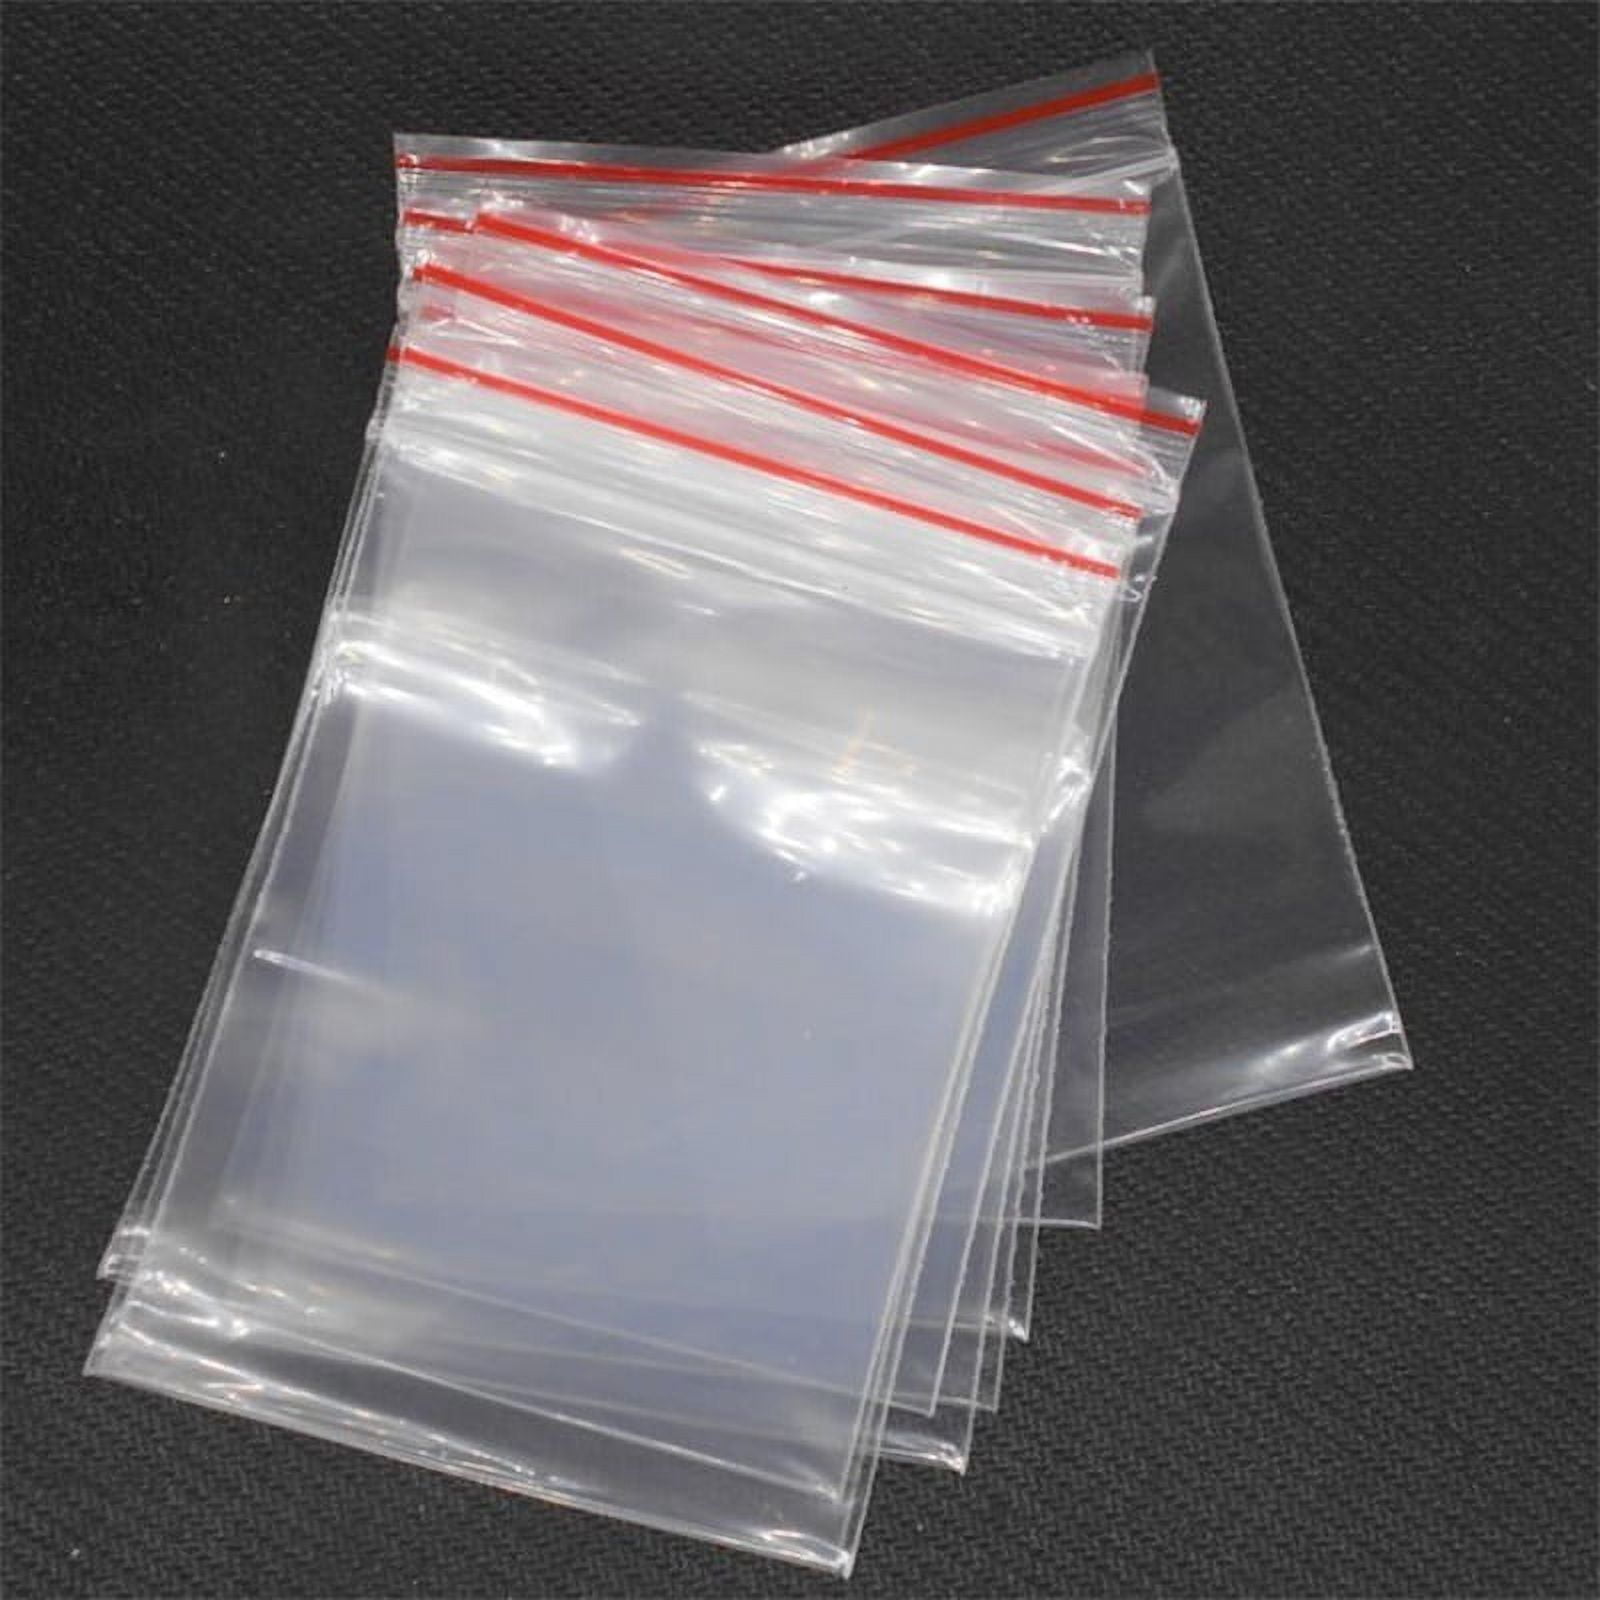 Premium Photo  Colored pills or tablets hanging in small ziplock